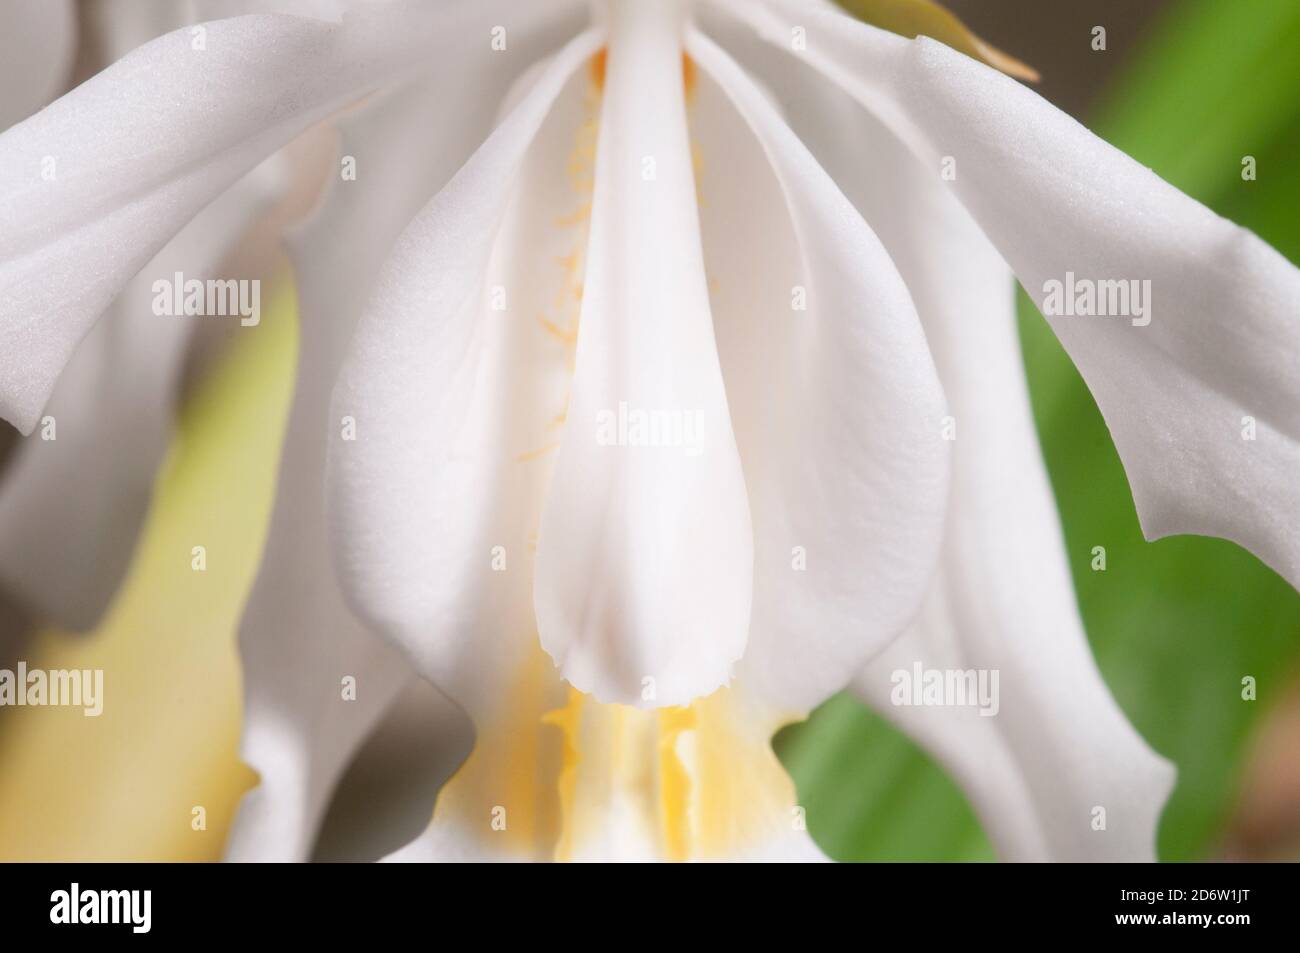 Flowers of Coelogyne cristata orchid, close up shot Stock Photo